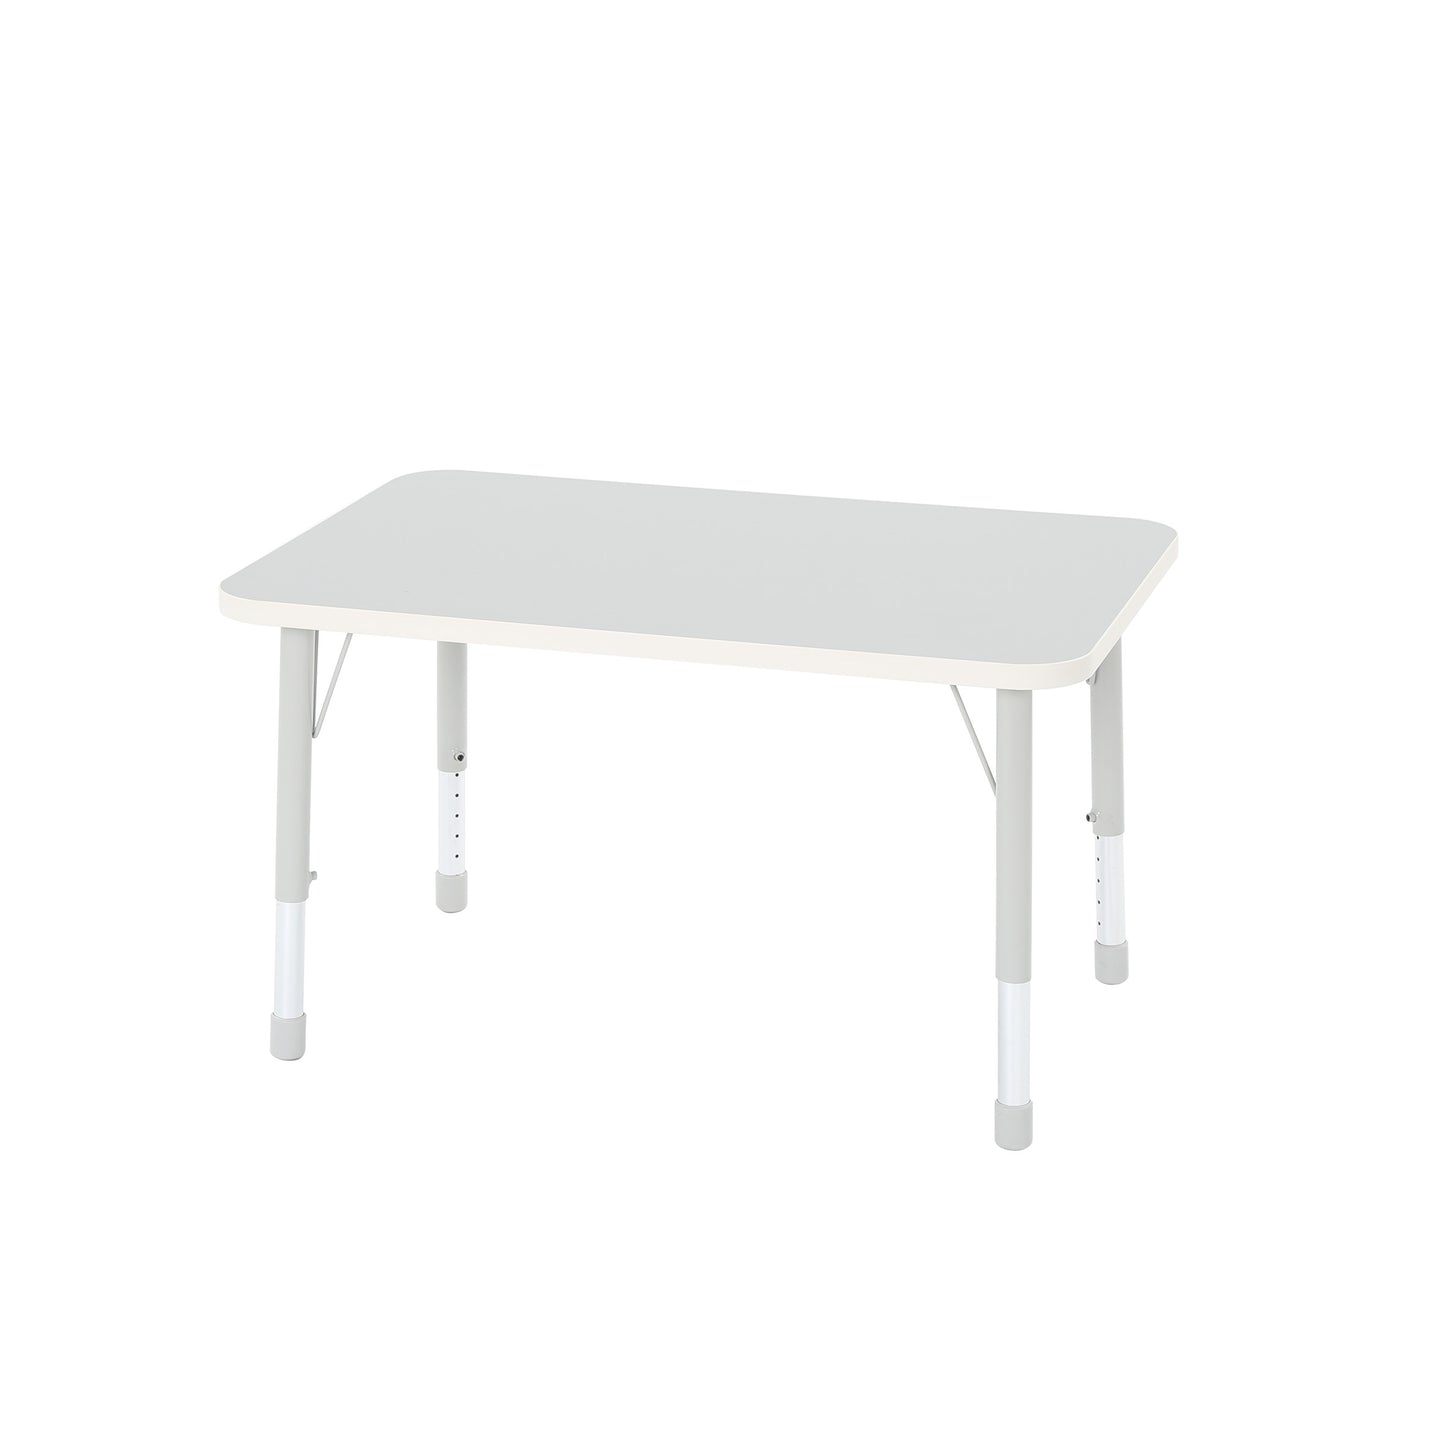 Thrifty Rectangular Table 4 Seater – Grey